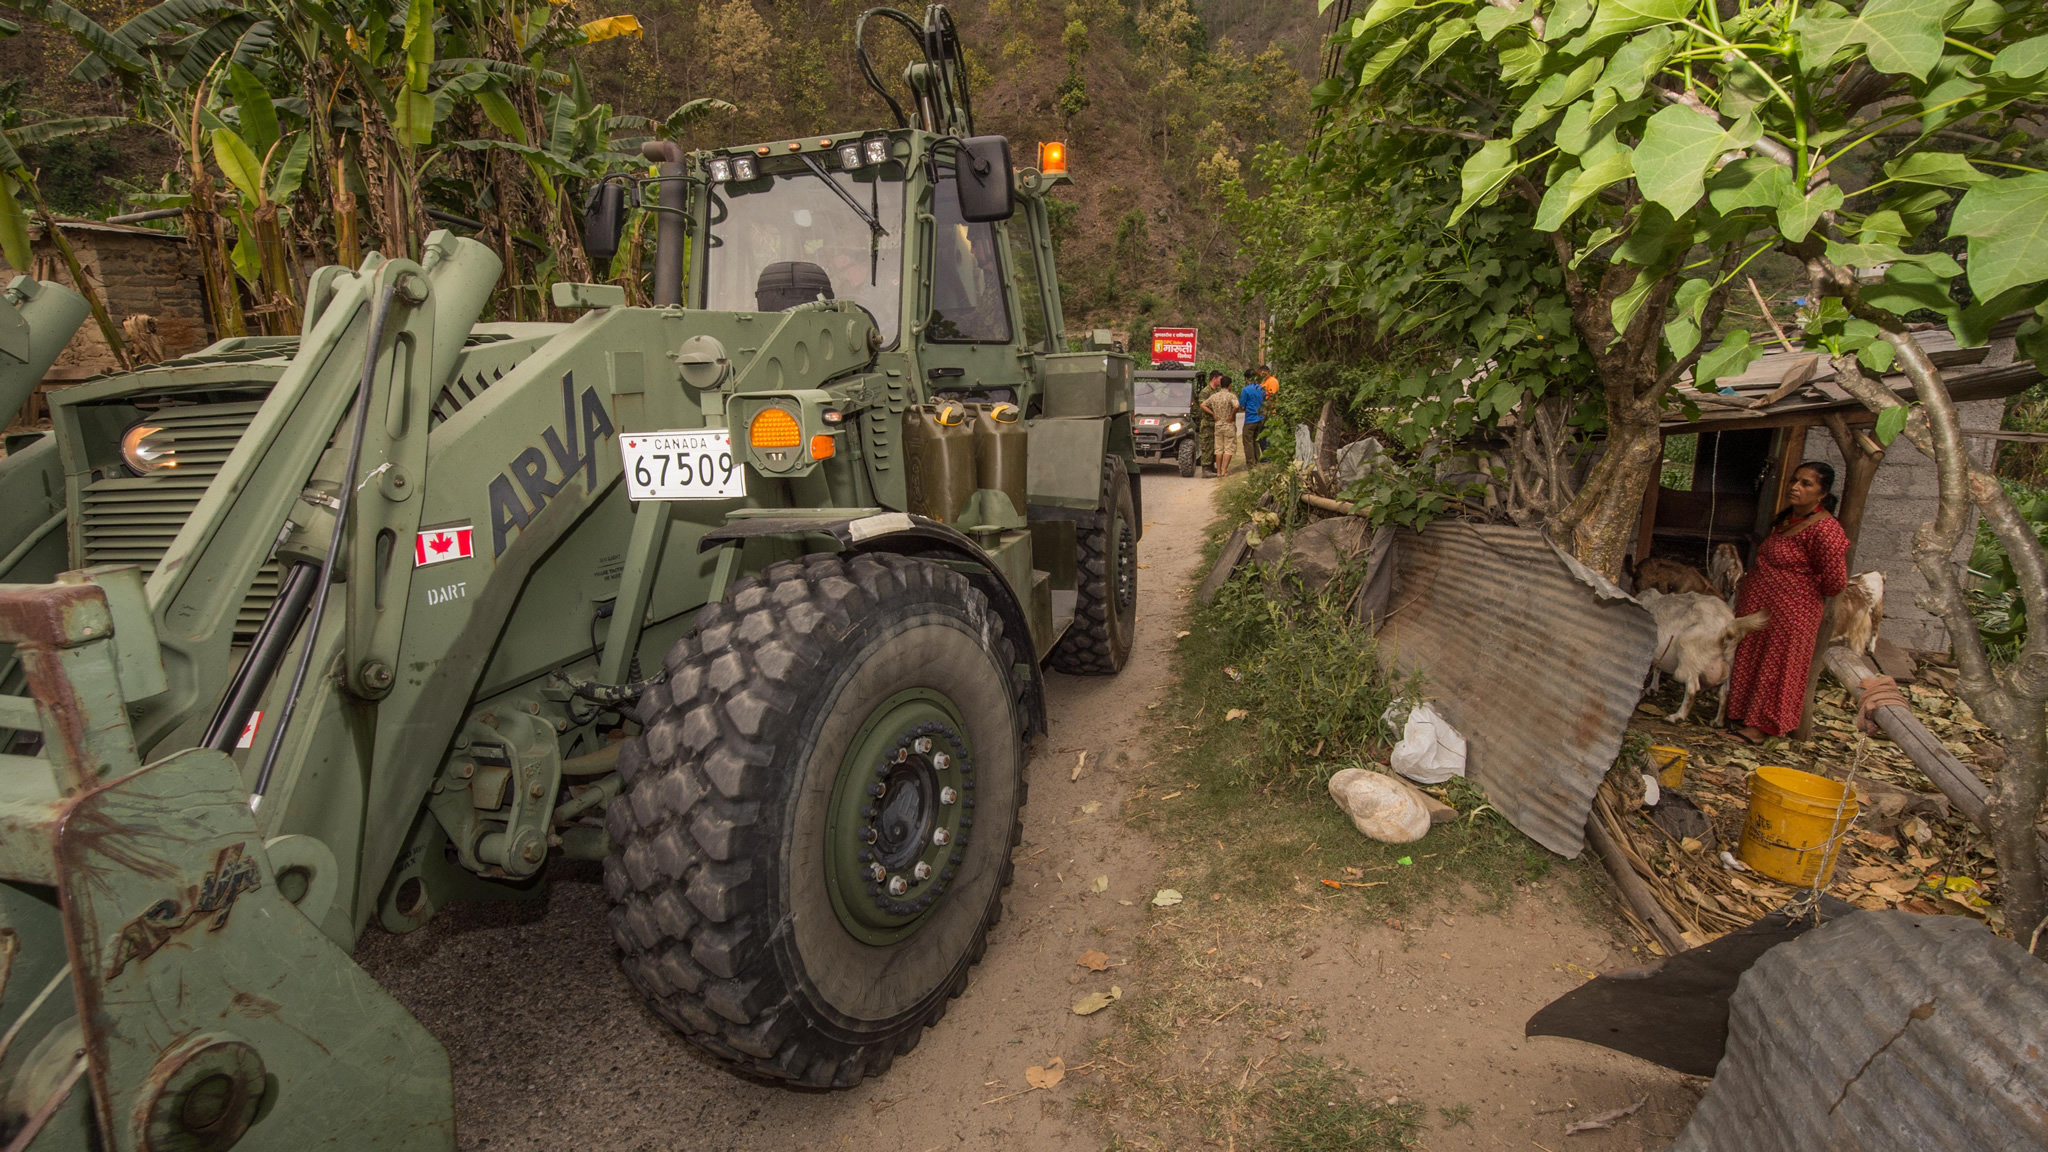 Members of the DART combat engineering team leading a versatile vehicle engineering (VPG), opens the passage to the village of Dolkha, Sindhupalchok district in Nepal, as part of Operation RENAISSANCE 15-1, May 7, 2015.
Photo: Sgt Yannick Bedard, Canadian Forces Joint Imagery Centre